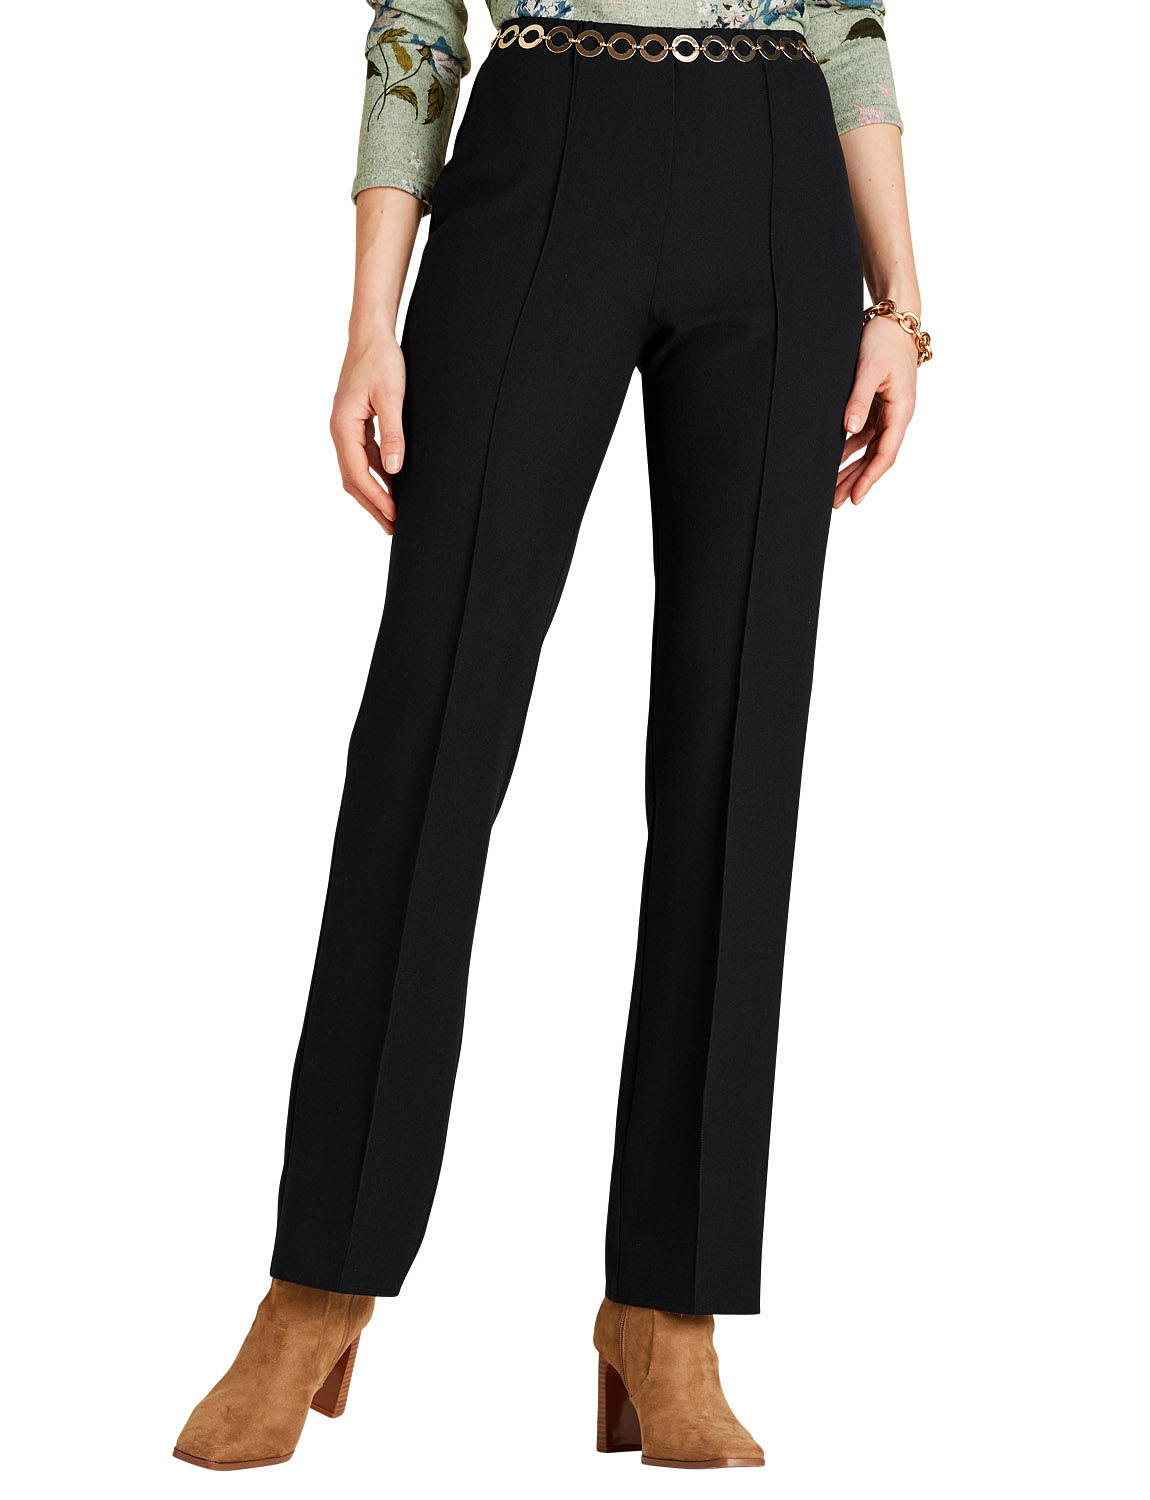 Chums Ladies Womens Thermal Lined Trousers